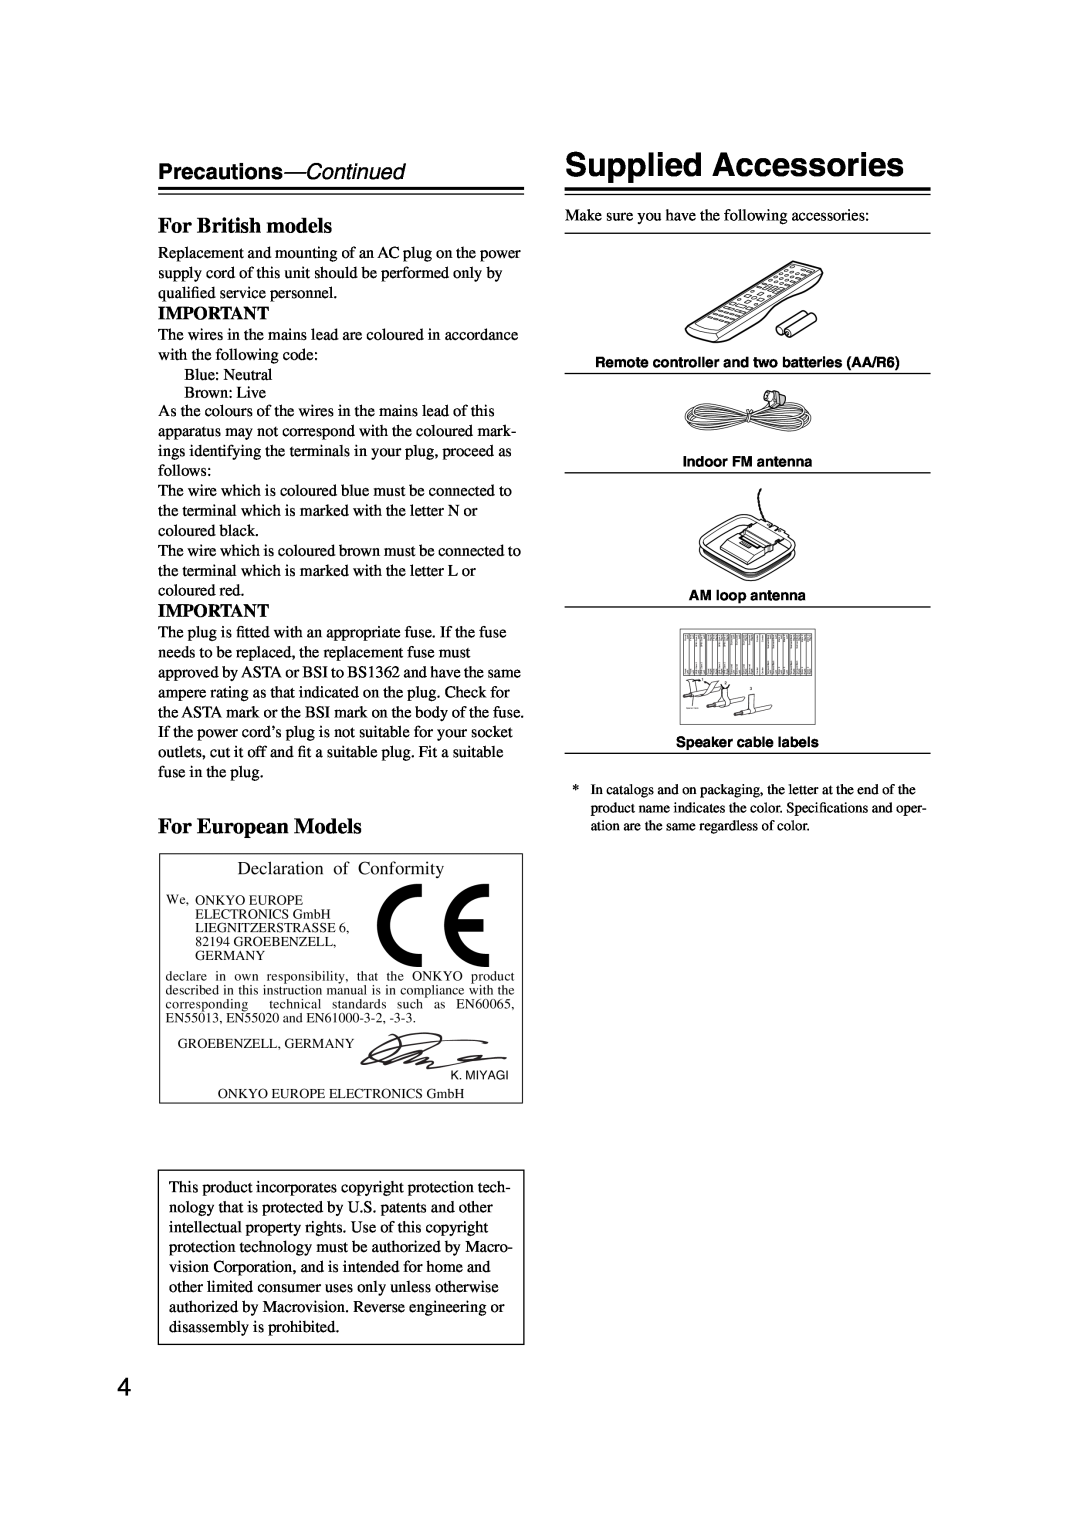 Onkyo TX-SR574 instruction manual Supplied Accessories, Precautions-Continued, For British models, For European Models 